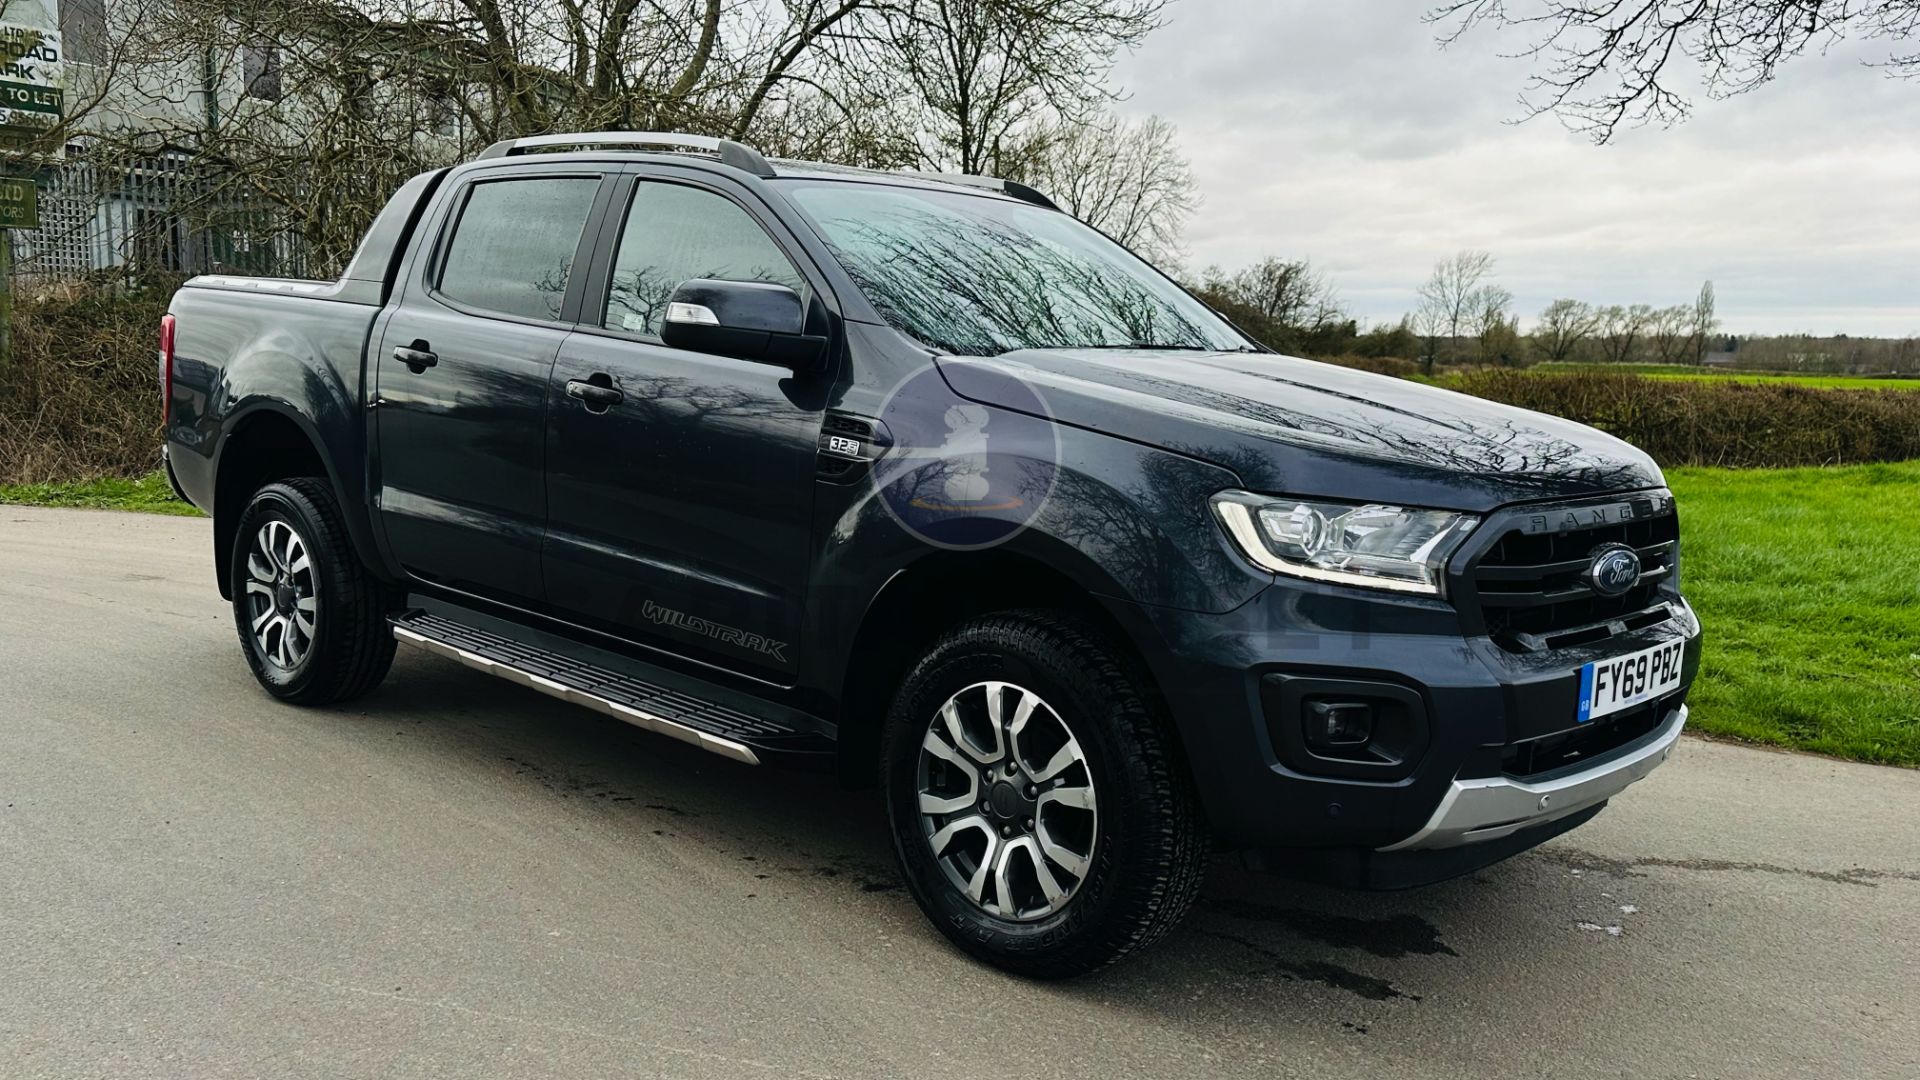 FORD RANGER *WILDTRAK EDITION* DOUBLE CAB PICK-UP (2020 - EURO 6) 3.2 TDCI - AUTOMATIC *HUGE SPEC* - Image 3 of 49